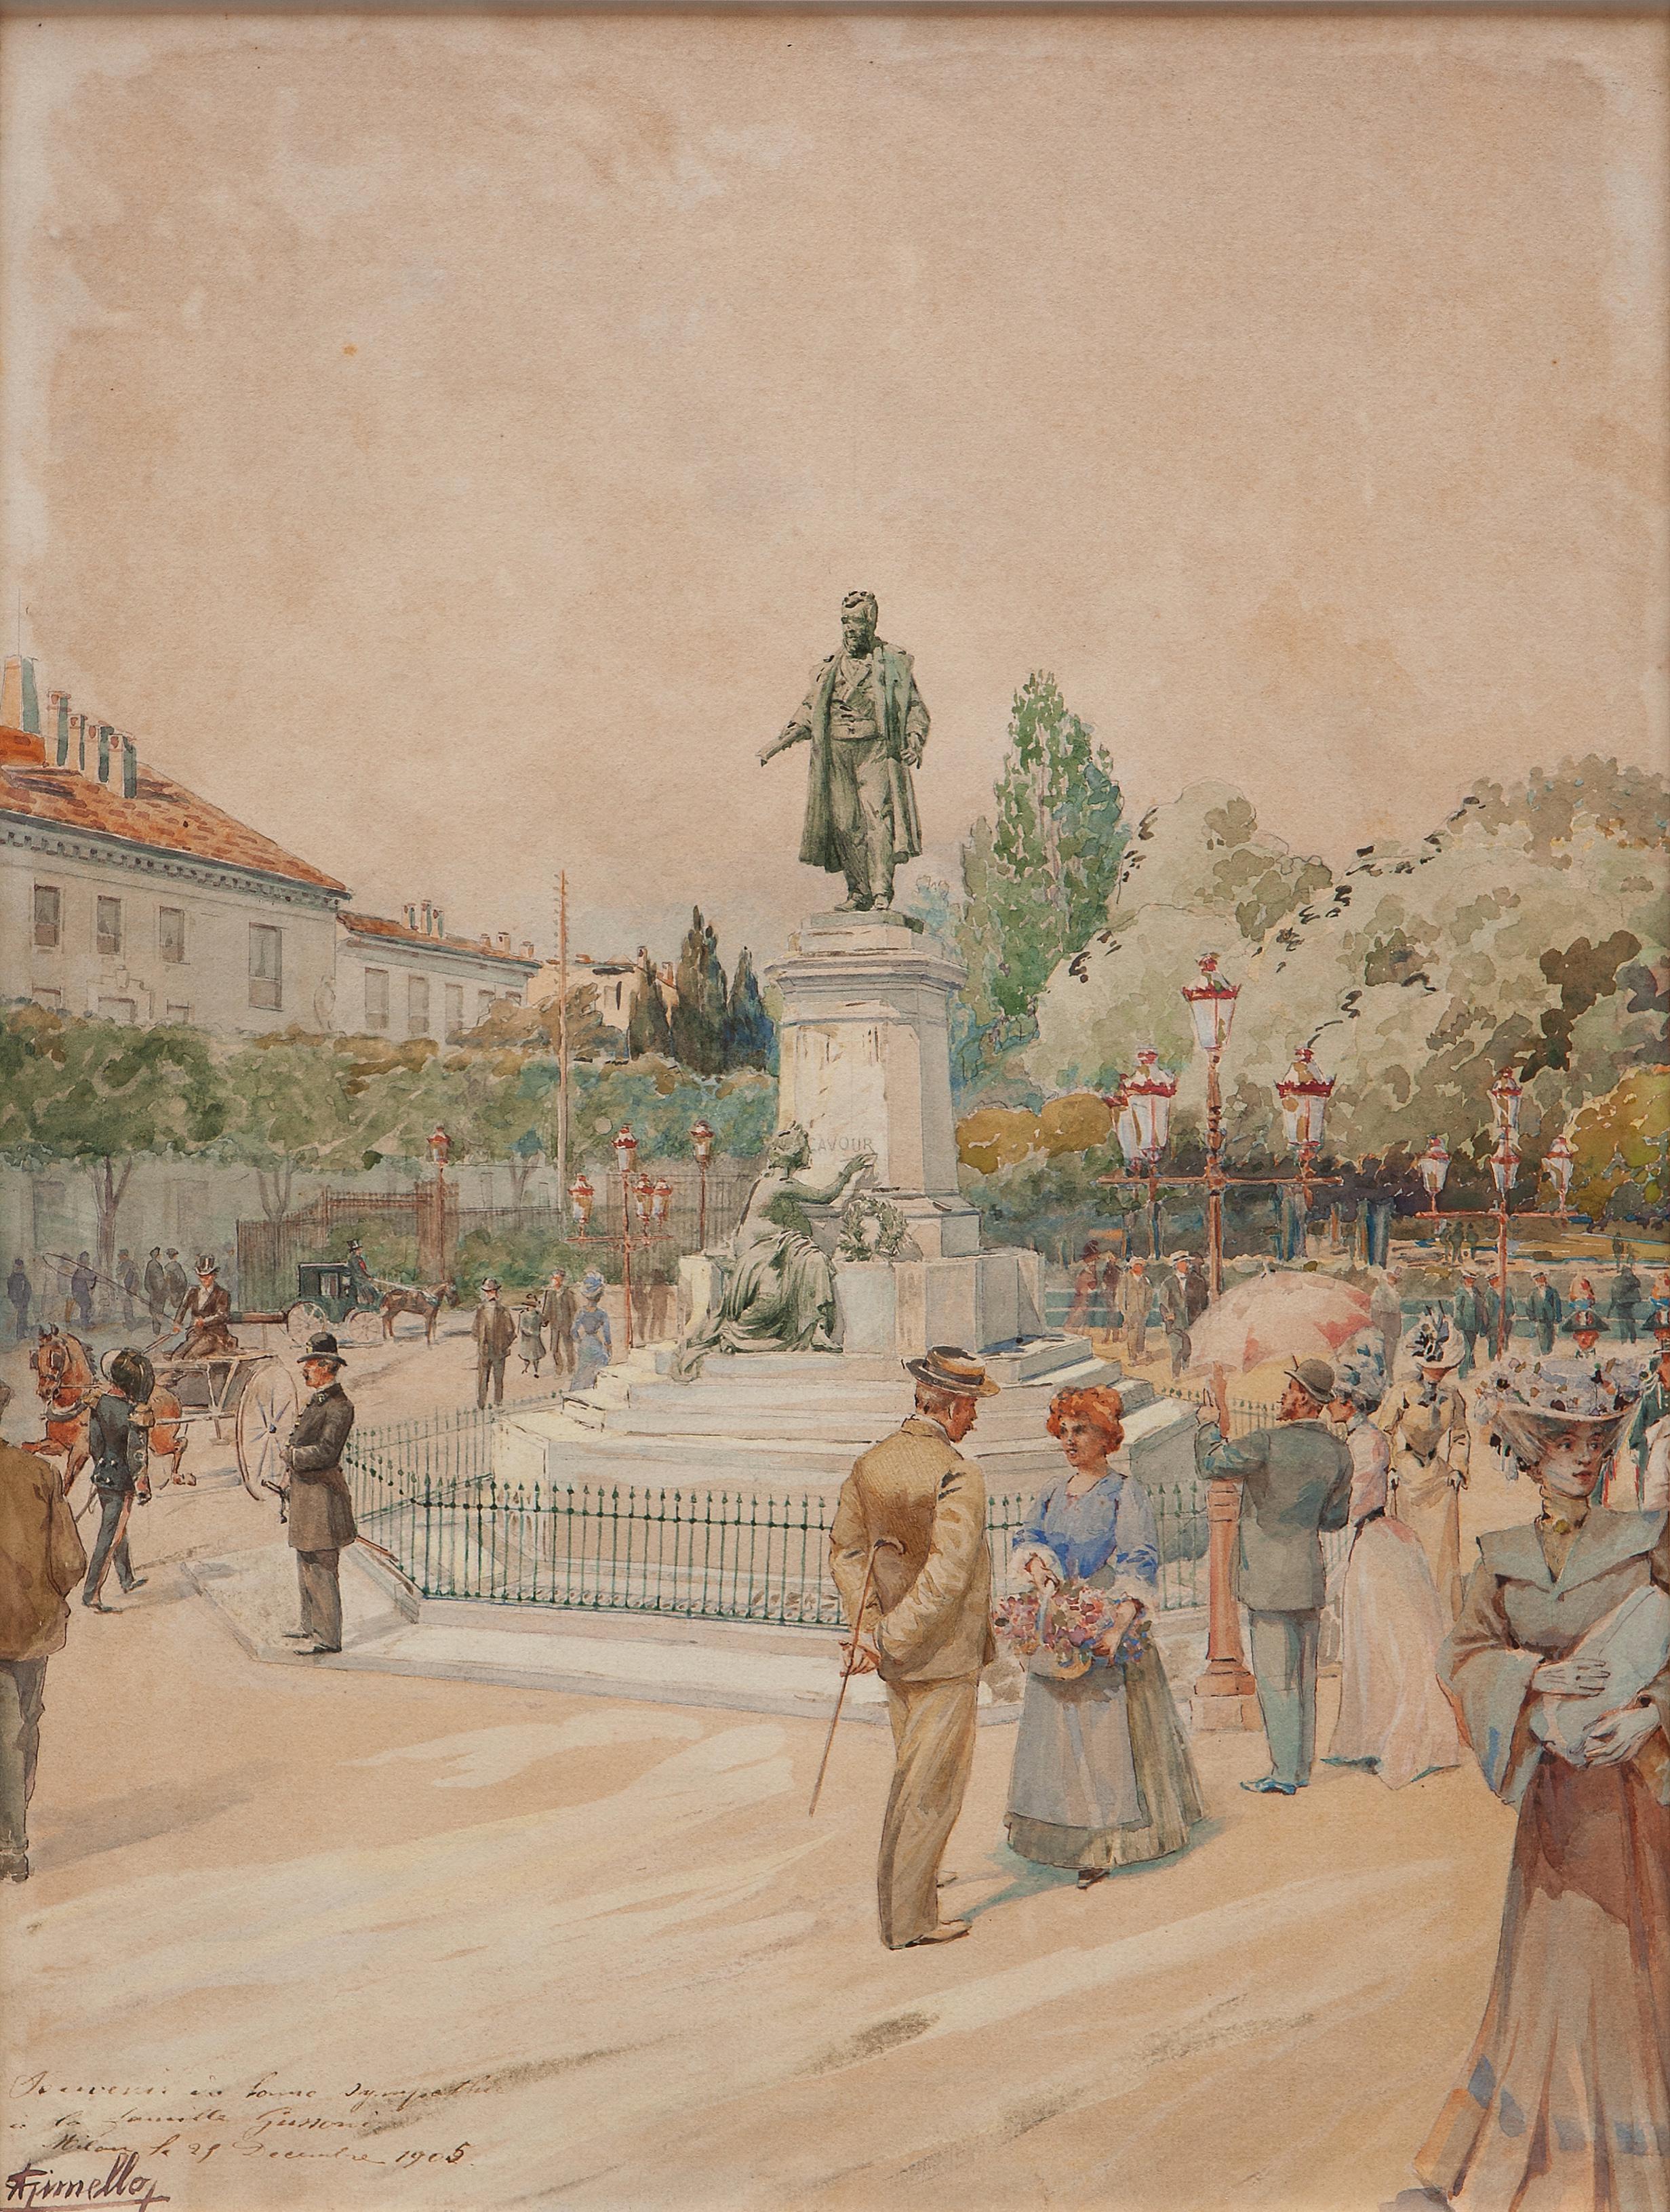 Piazza Cavour, Milan - 1905 - Art by A. Cirnello